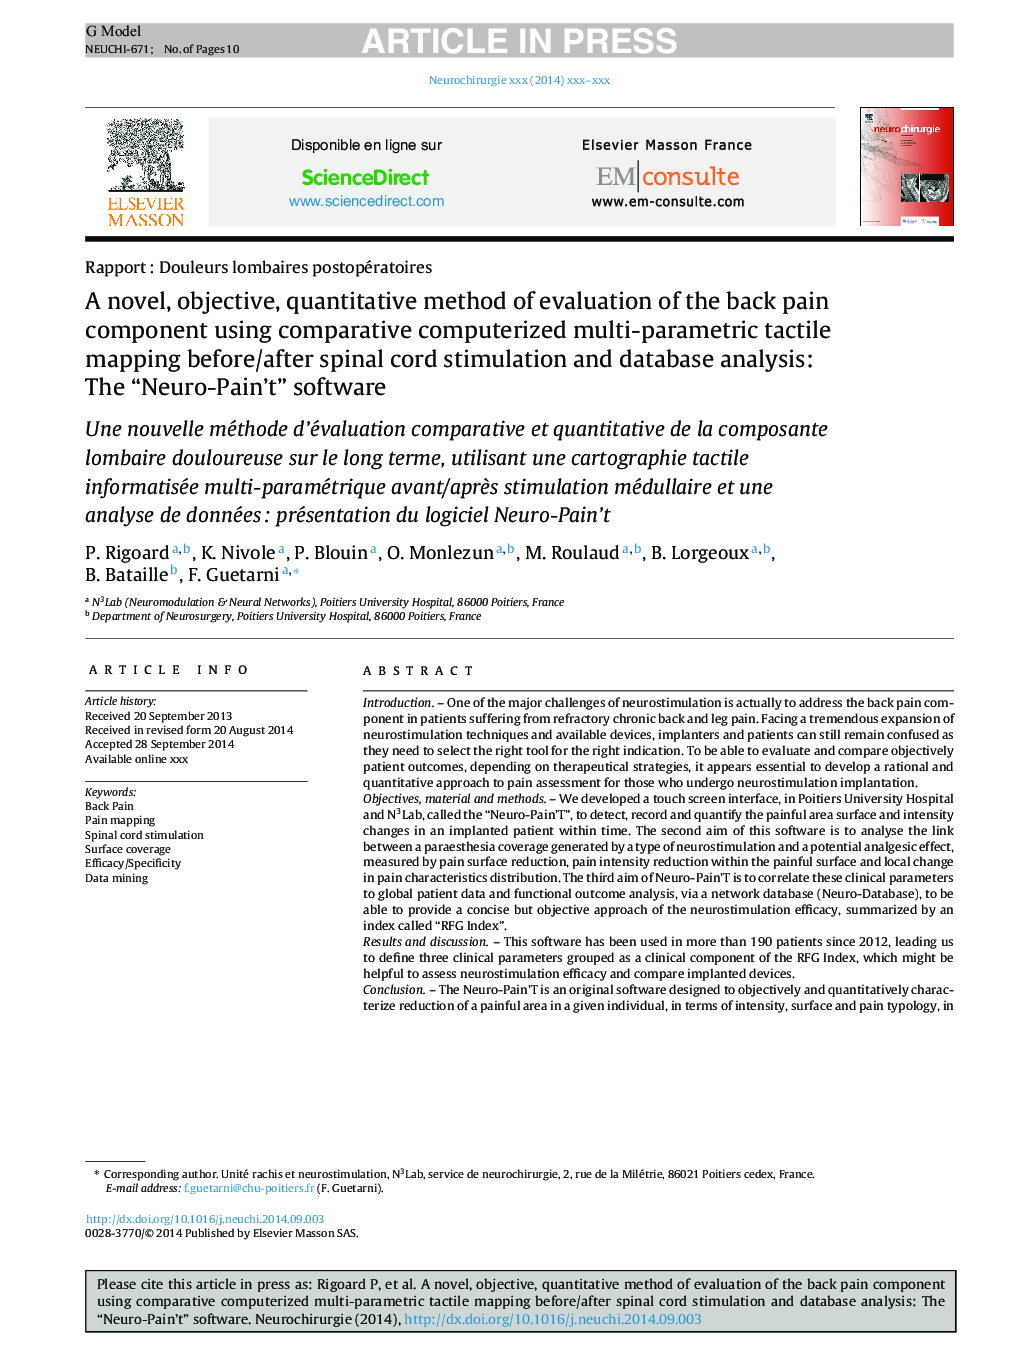 A novel, objective, quantitative method of evaluation of the back pain component using comparative computerized multi-parametric tactile mapping before/after spinal cord stimulation and database analysis: The “Neuro-Pain't” software